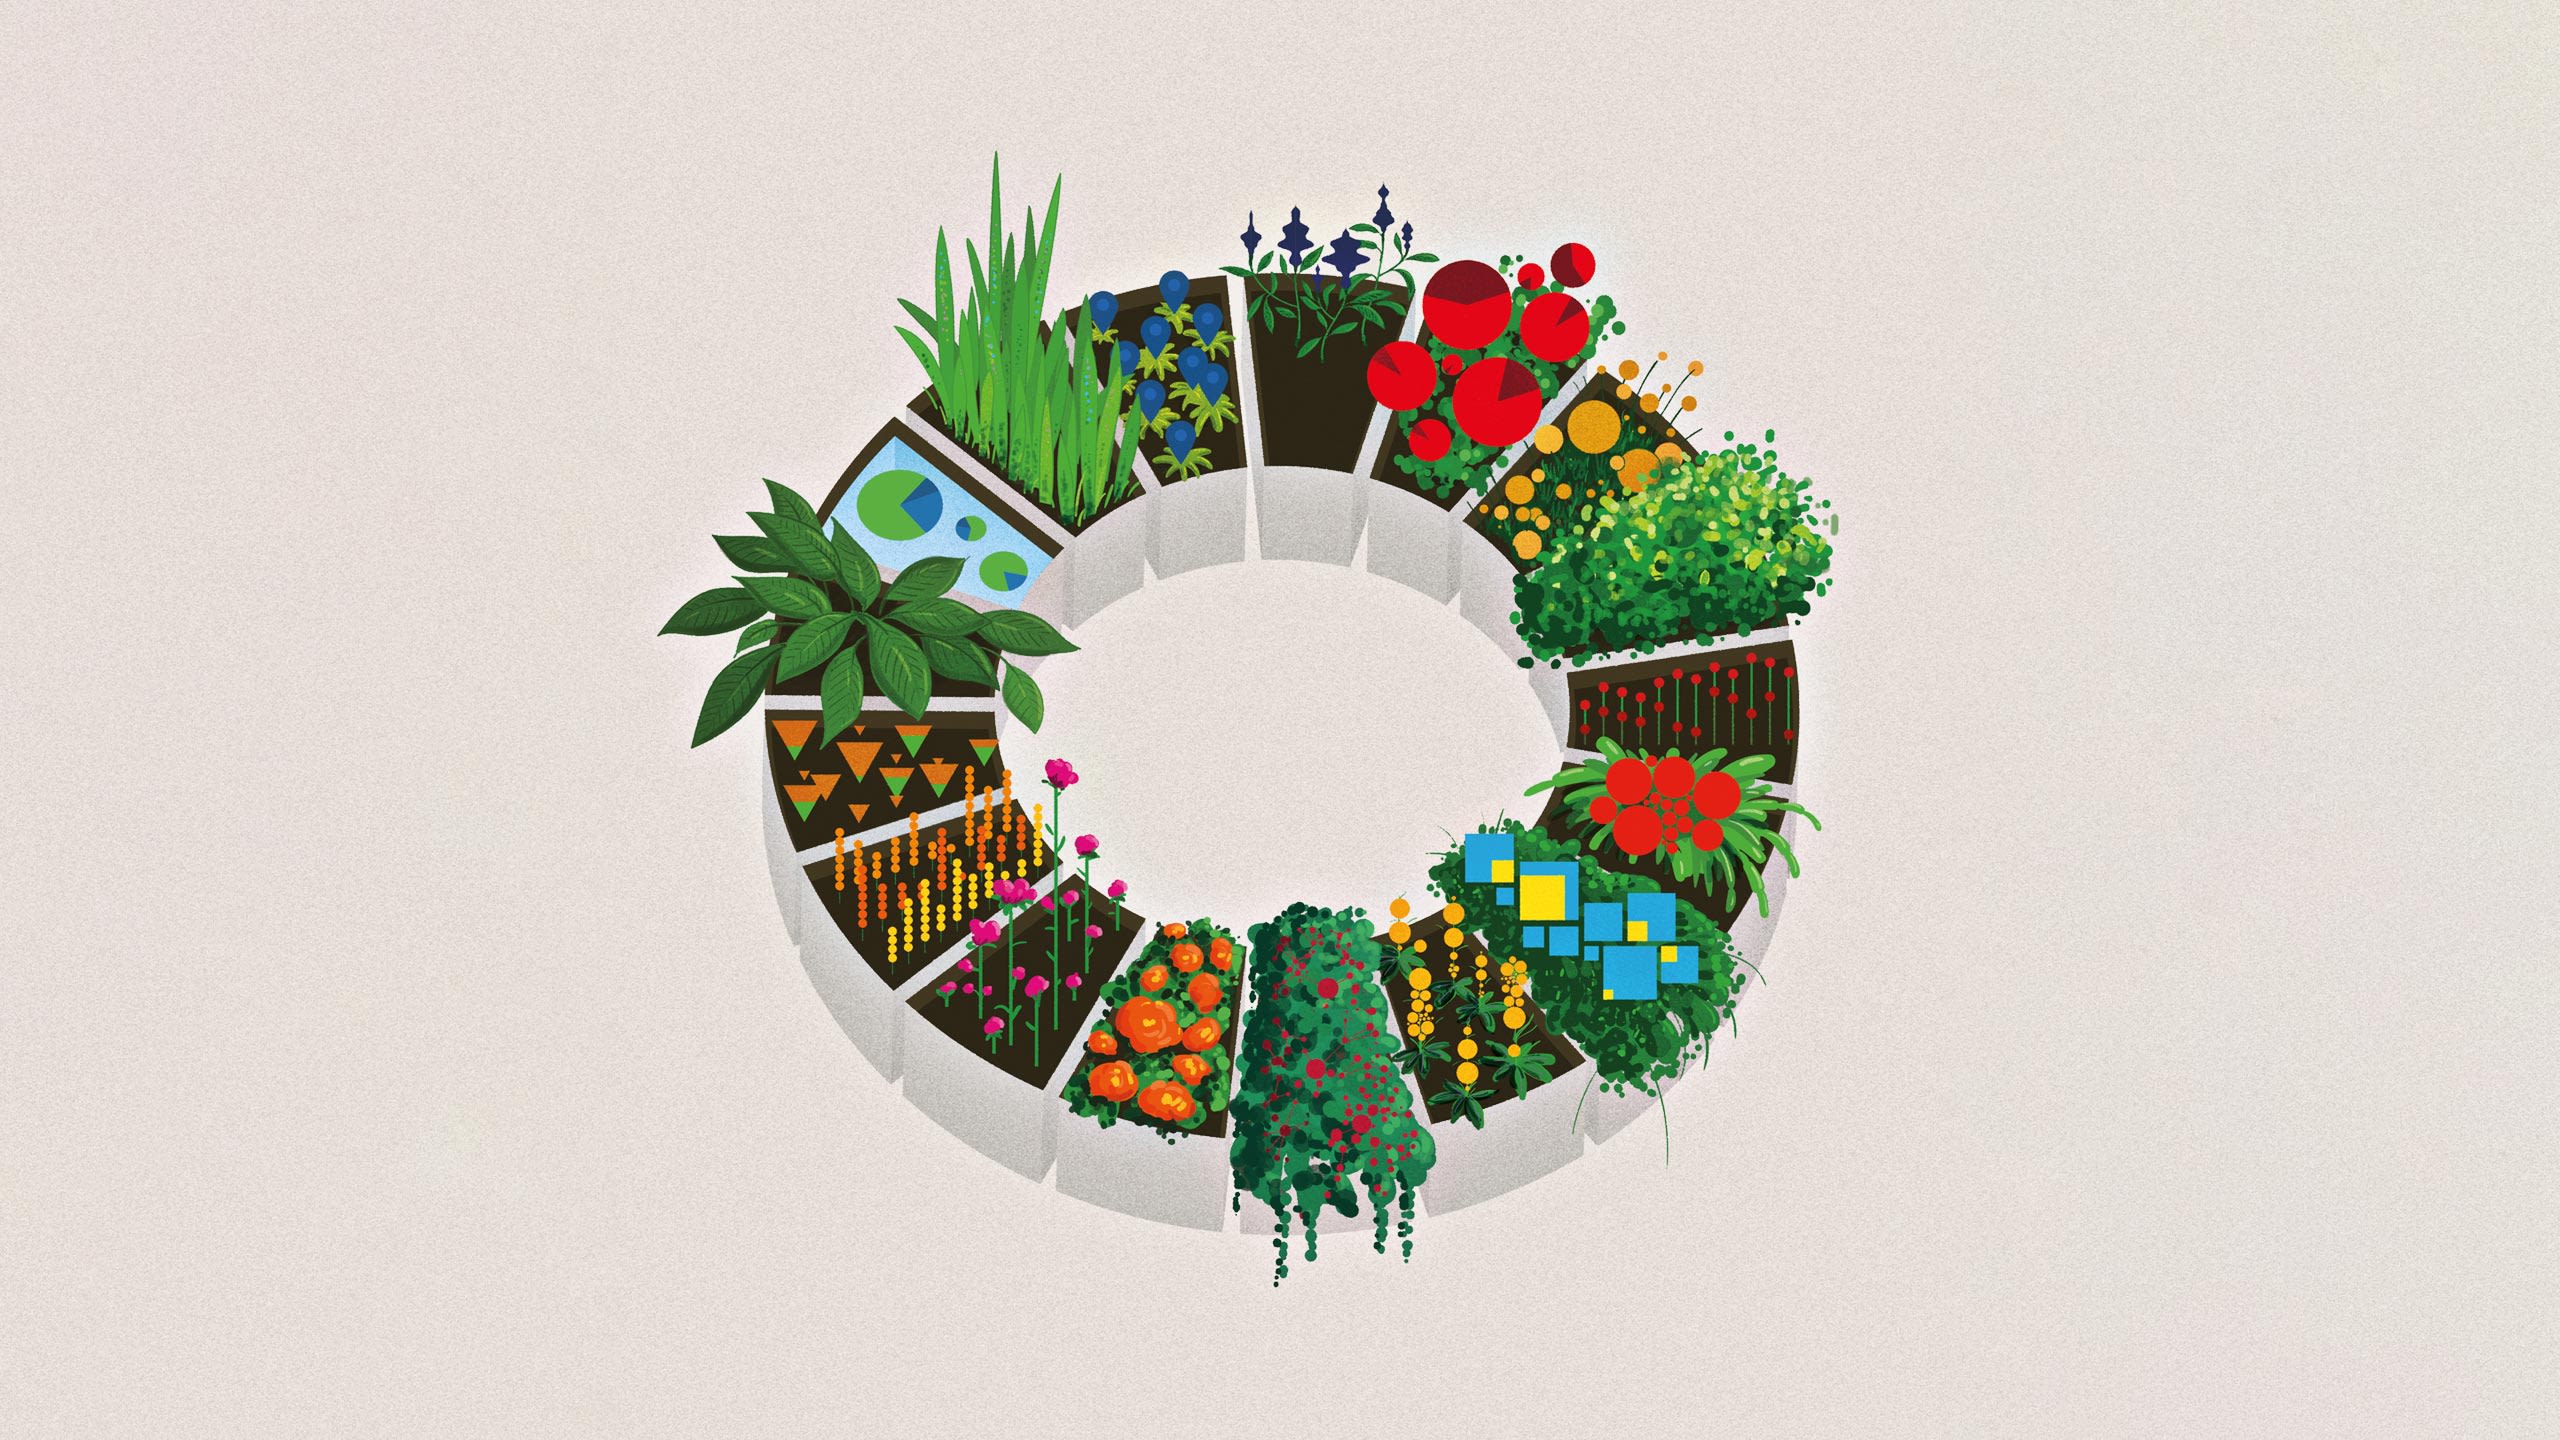 Stylized illustration showing a 3D ring with 17 segments. Each segment features organic plant shapes and data visualisation elements.